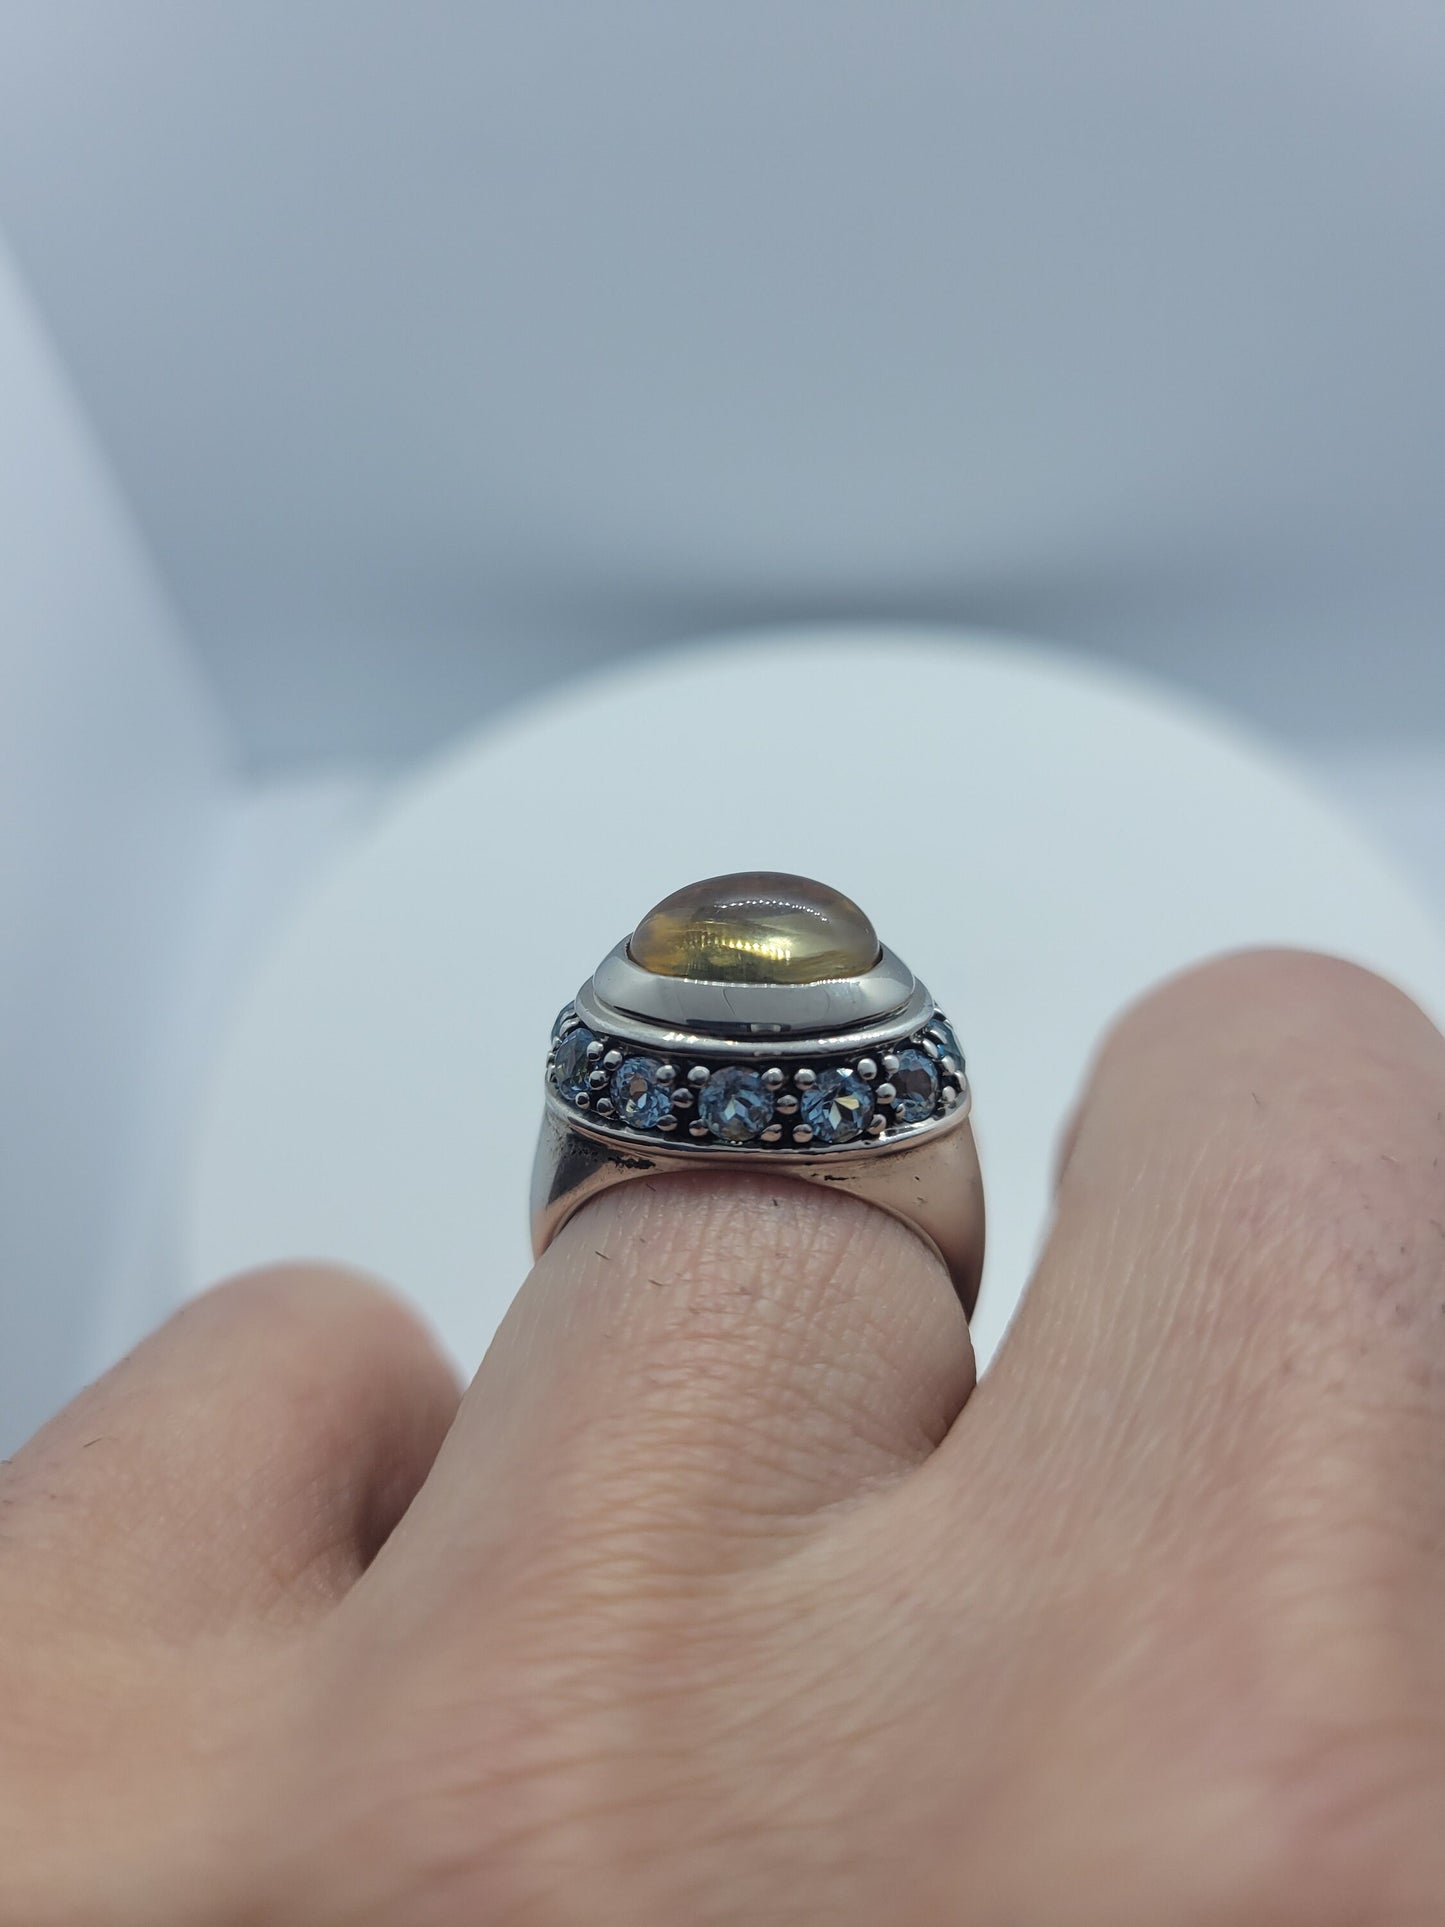 Vintage Yellow Citrine Ring with Blue Topaz set in 925 Sterling Silver